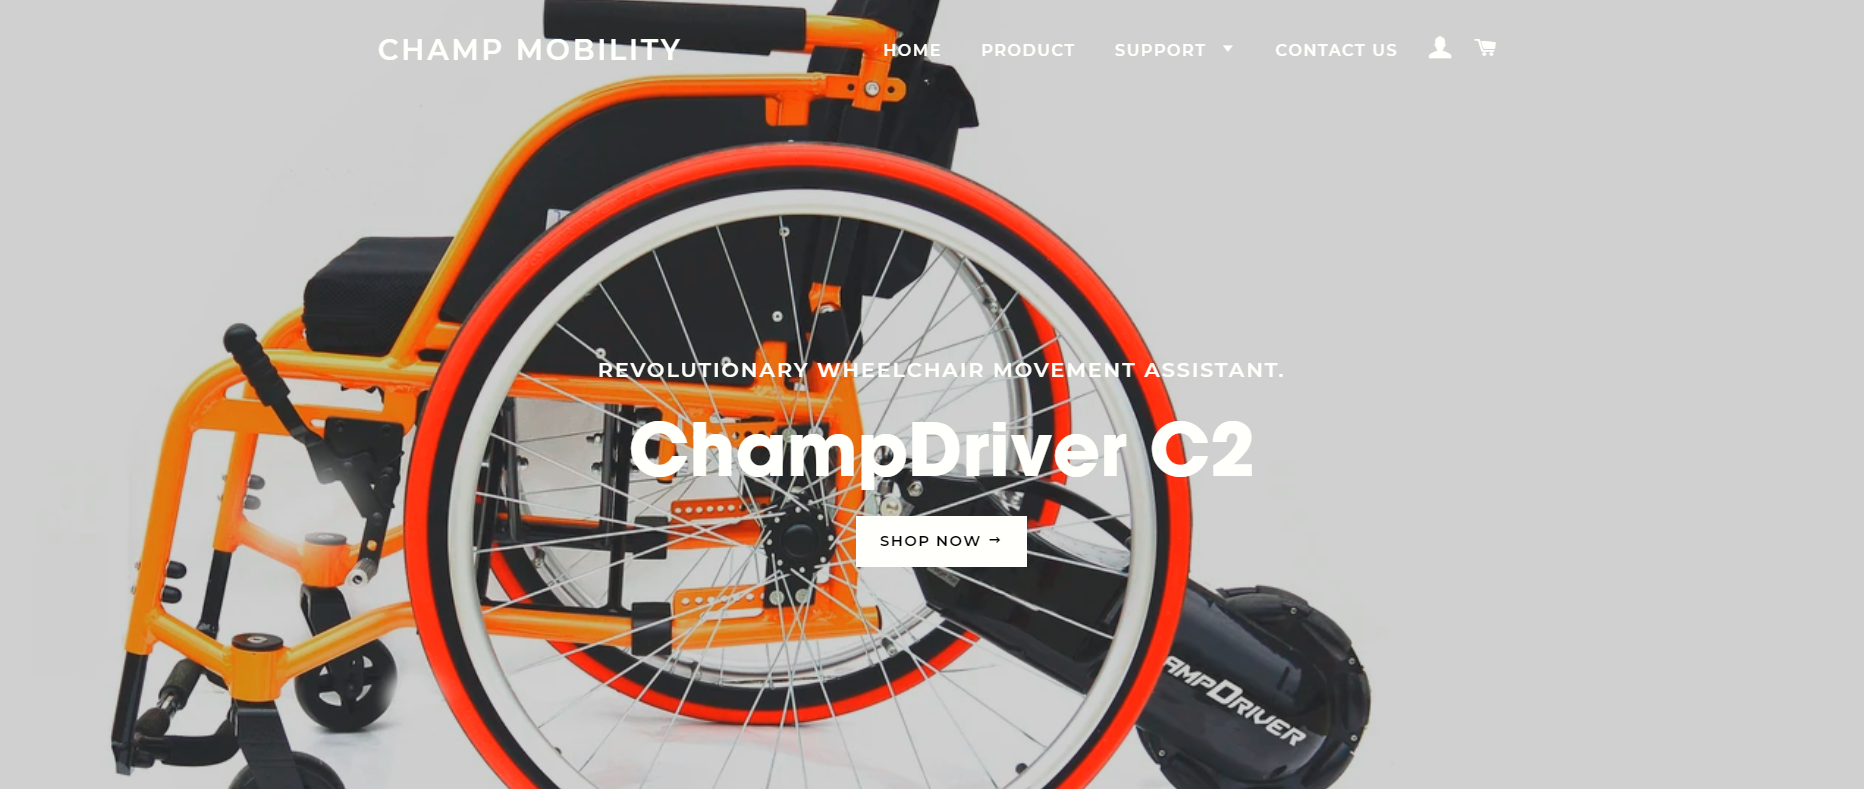 champ-mobility